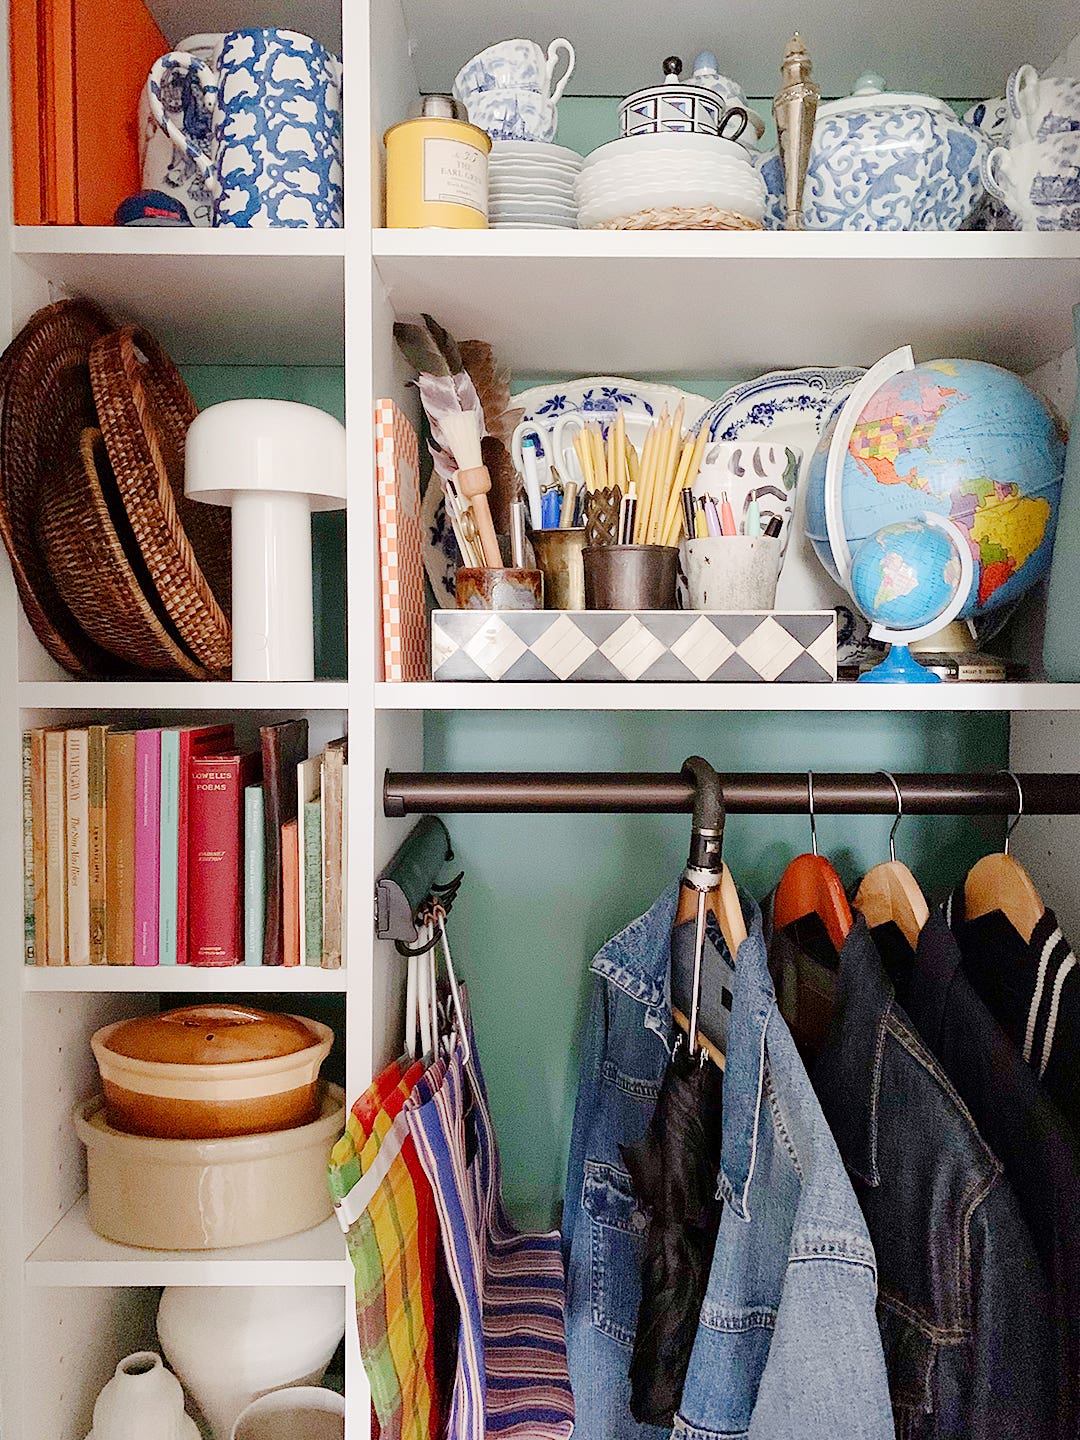 Our Style Editor’s Front Hall Closet Features an Ingenious Spot for Tote Bags